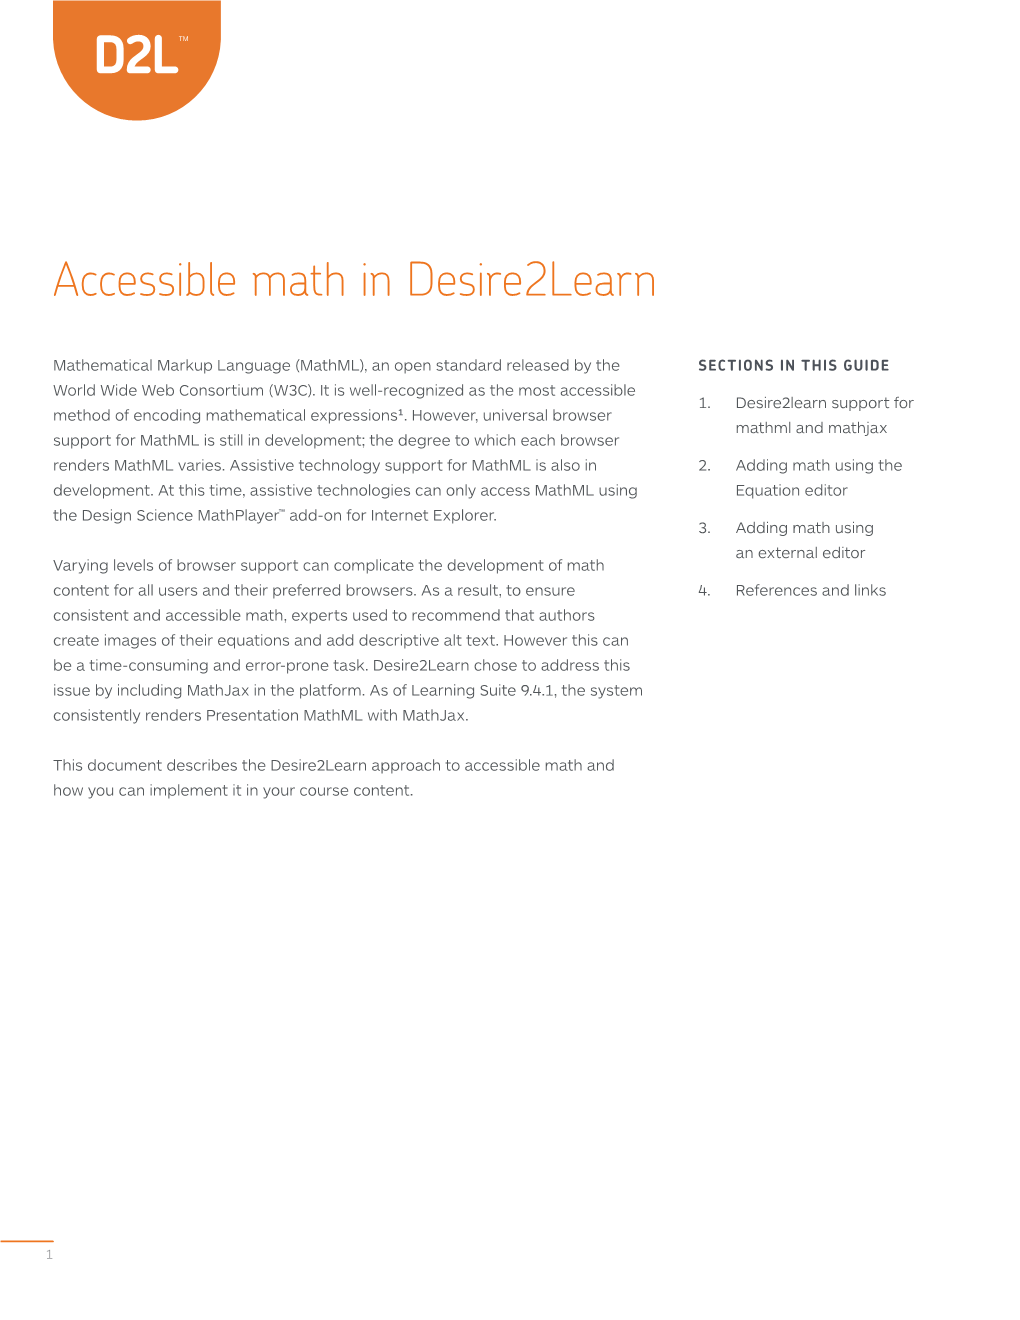 Accessible Math in Desire2learn